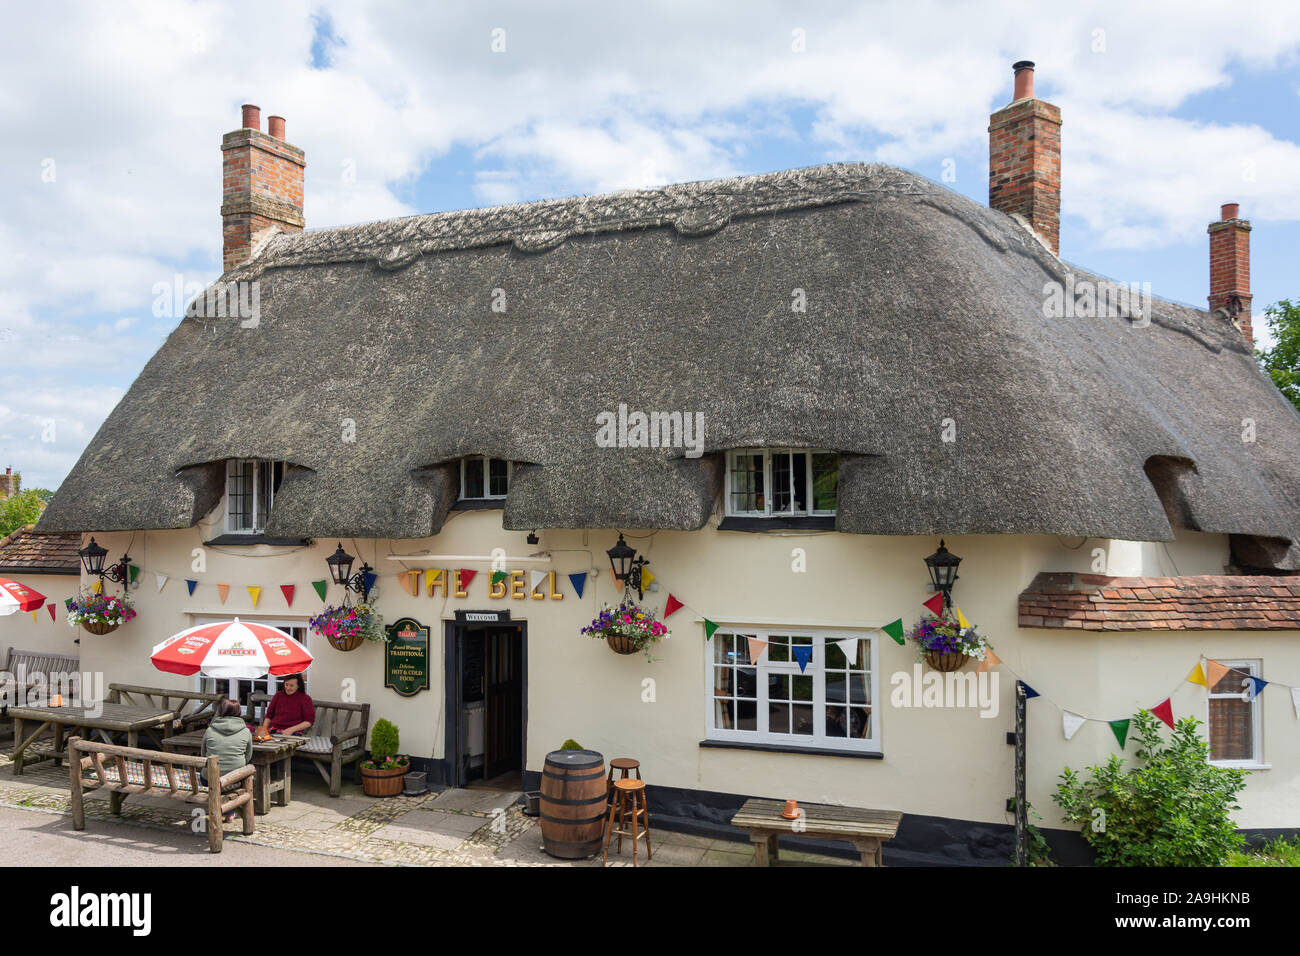 16th century thatched 'The Bell' Pub, The Green, Chearsley, Buckinghamshire, England, United Kingdom Stock Photo